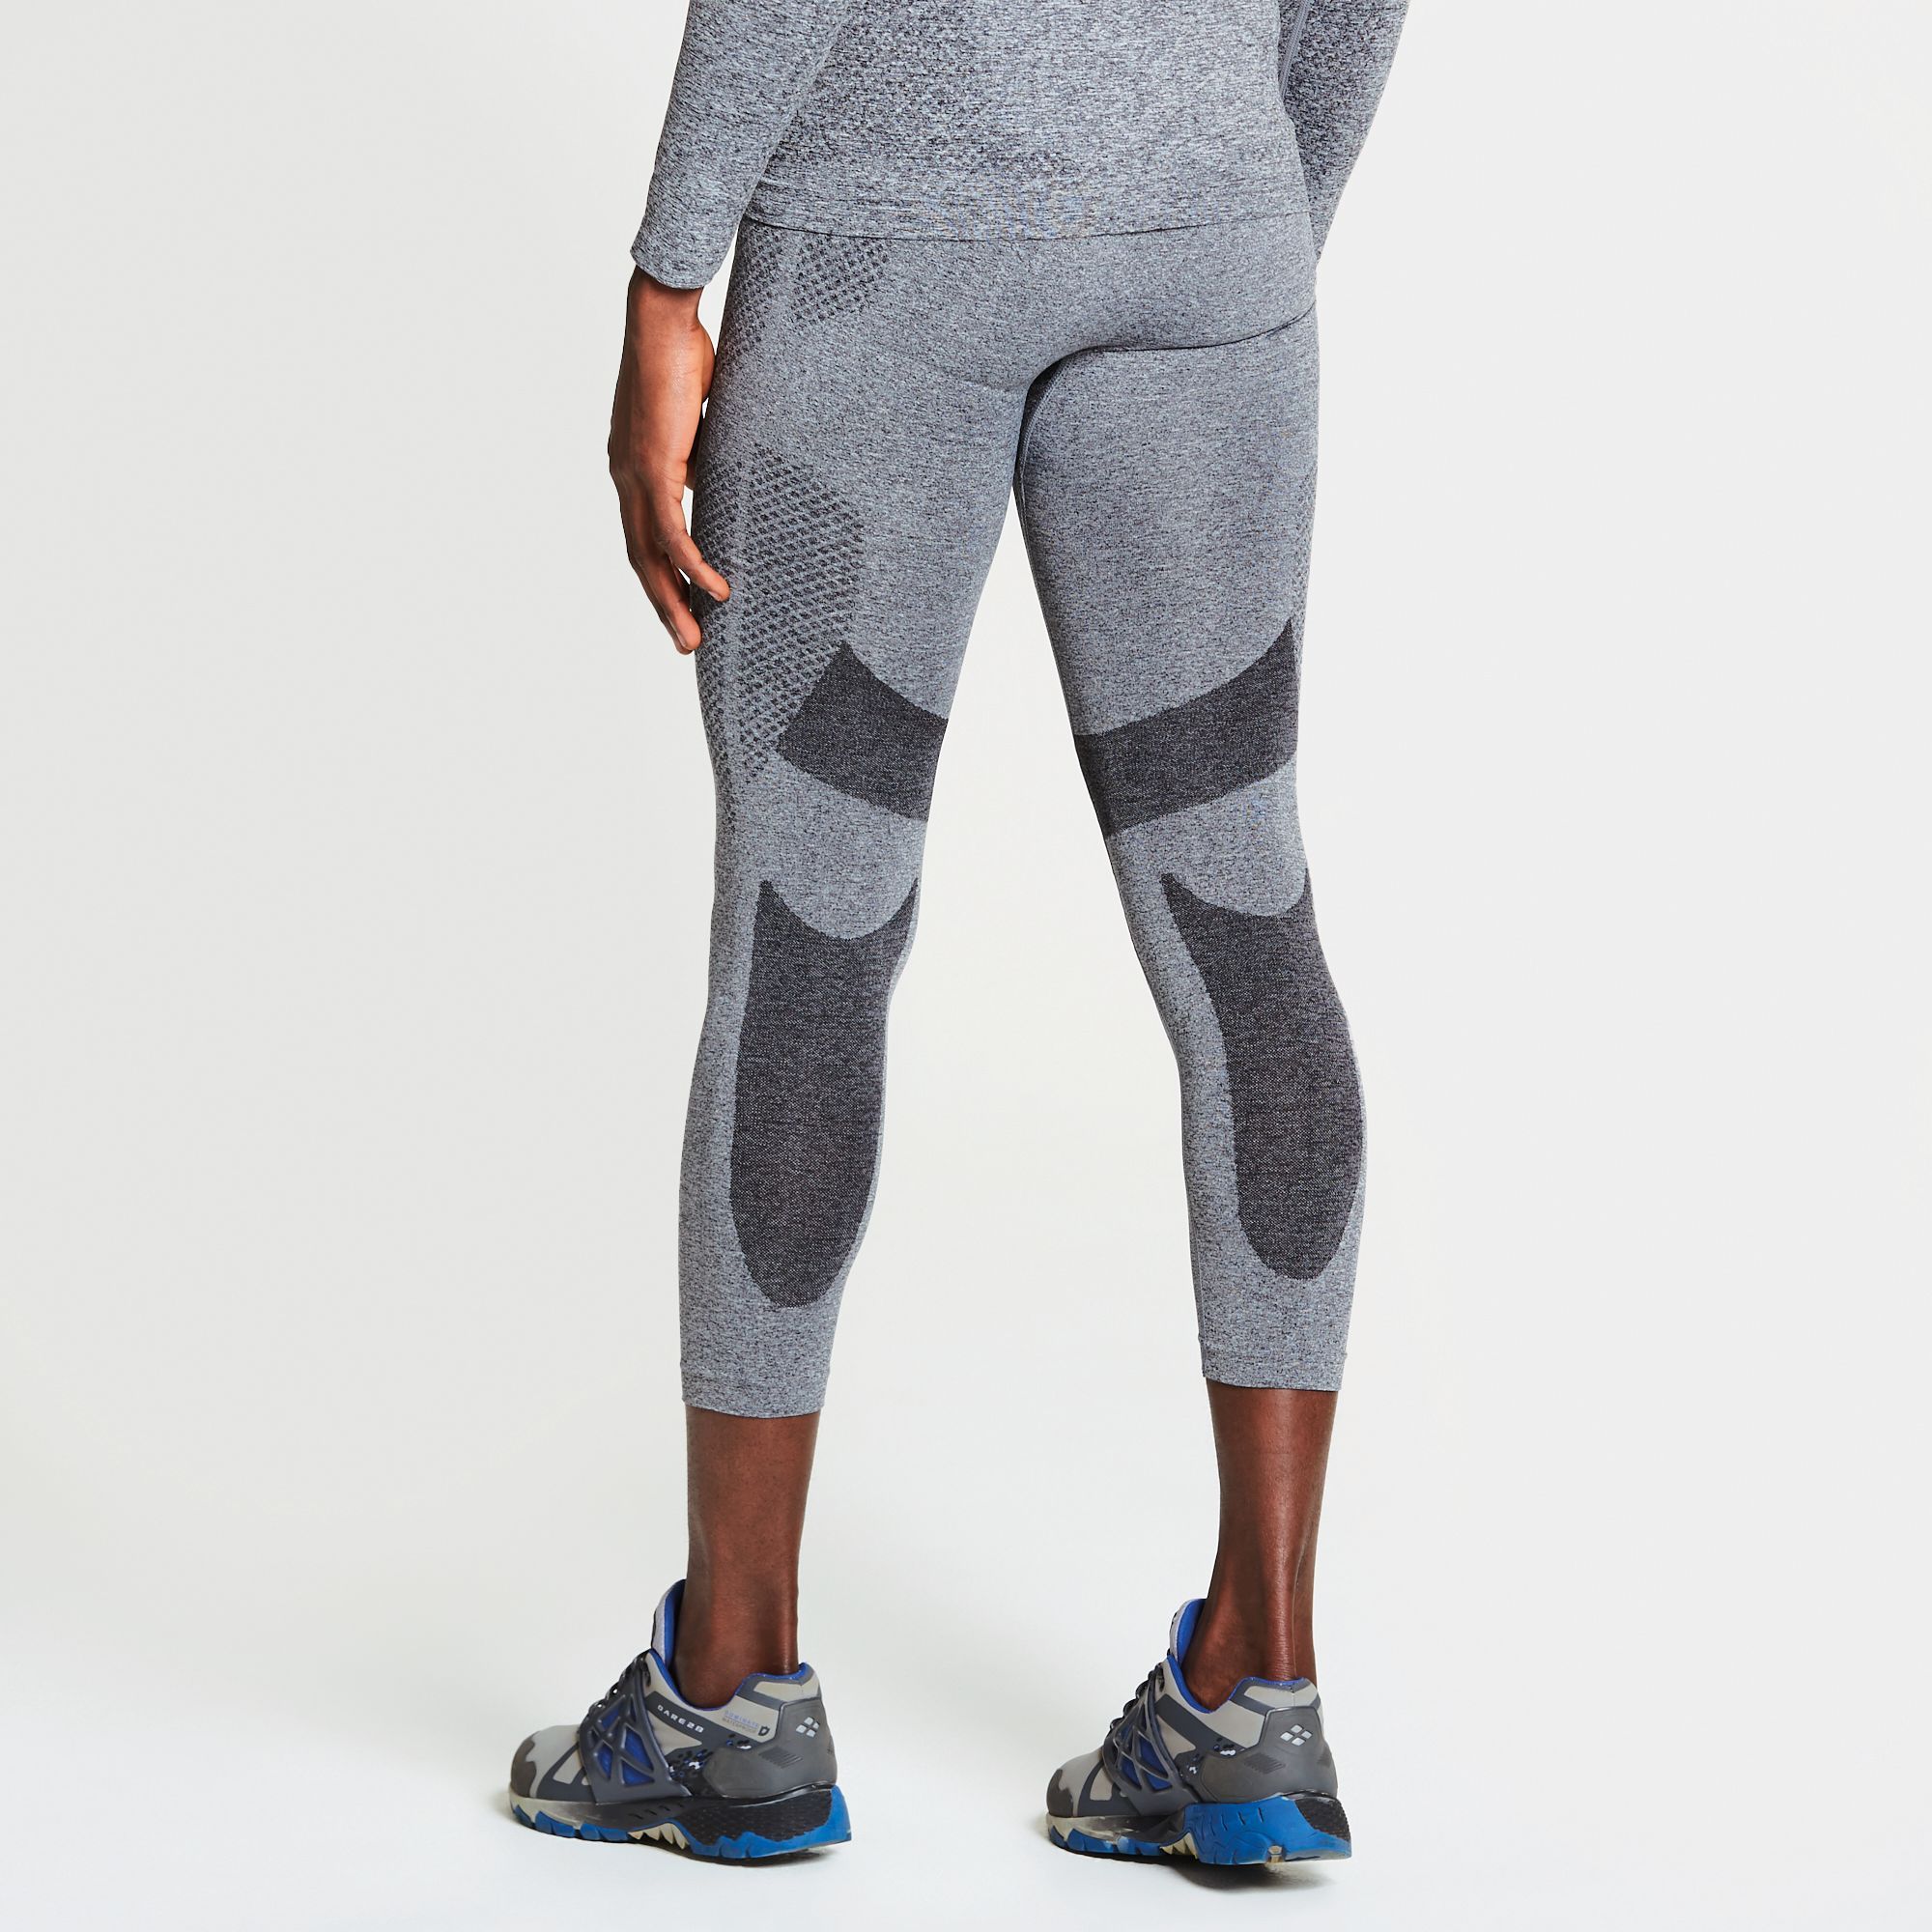 The mens Zonal III 3/4 length legging from Dare 2b is packed with comfort and performance for year-round use. It uses ergonomic body mapping with seamless construction and hint of elastane for total comfort in wear. The BODY fabric helps to regulate your core temperature by keeping you cool when your sweating and warm when your cold. It rapidly transfers moisture away from the skin, dries quickly when wet and has an  finish for lasting freshness. 55% Polyester, 38% Polyamide, 7% Elastane. Dare 2B Mens Tights/Shorts Sizing (waist approx): XS (28in/71cm), S (30in/76cm), M (32in/81cm), L (34in/86cm), XL (36in/92cm), XXL (38in/97cm), XXXL (40in/102cm), XXXXL (42in/107cm), XXXXXL (44in/112cm).